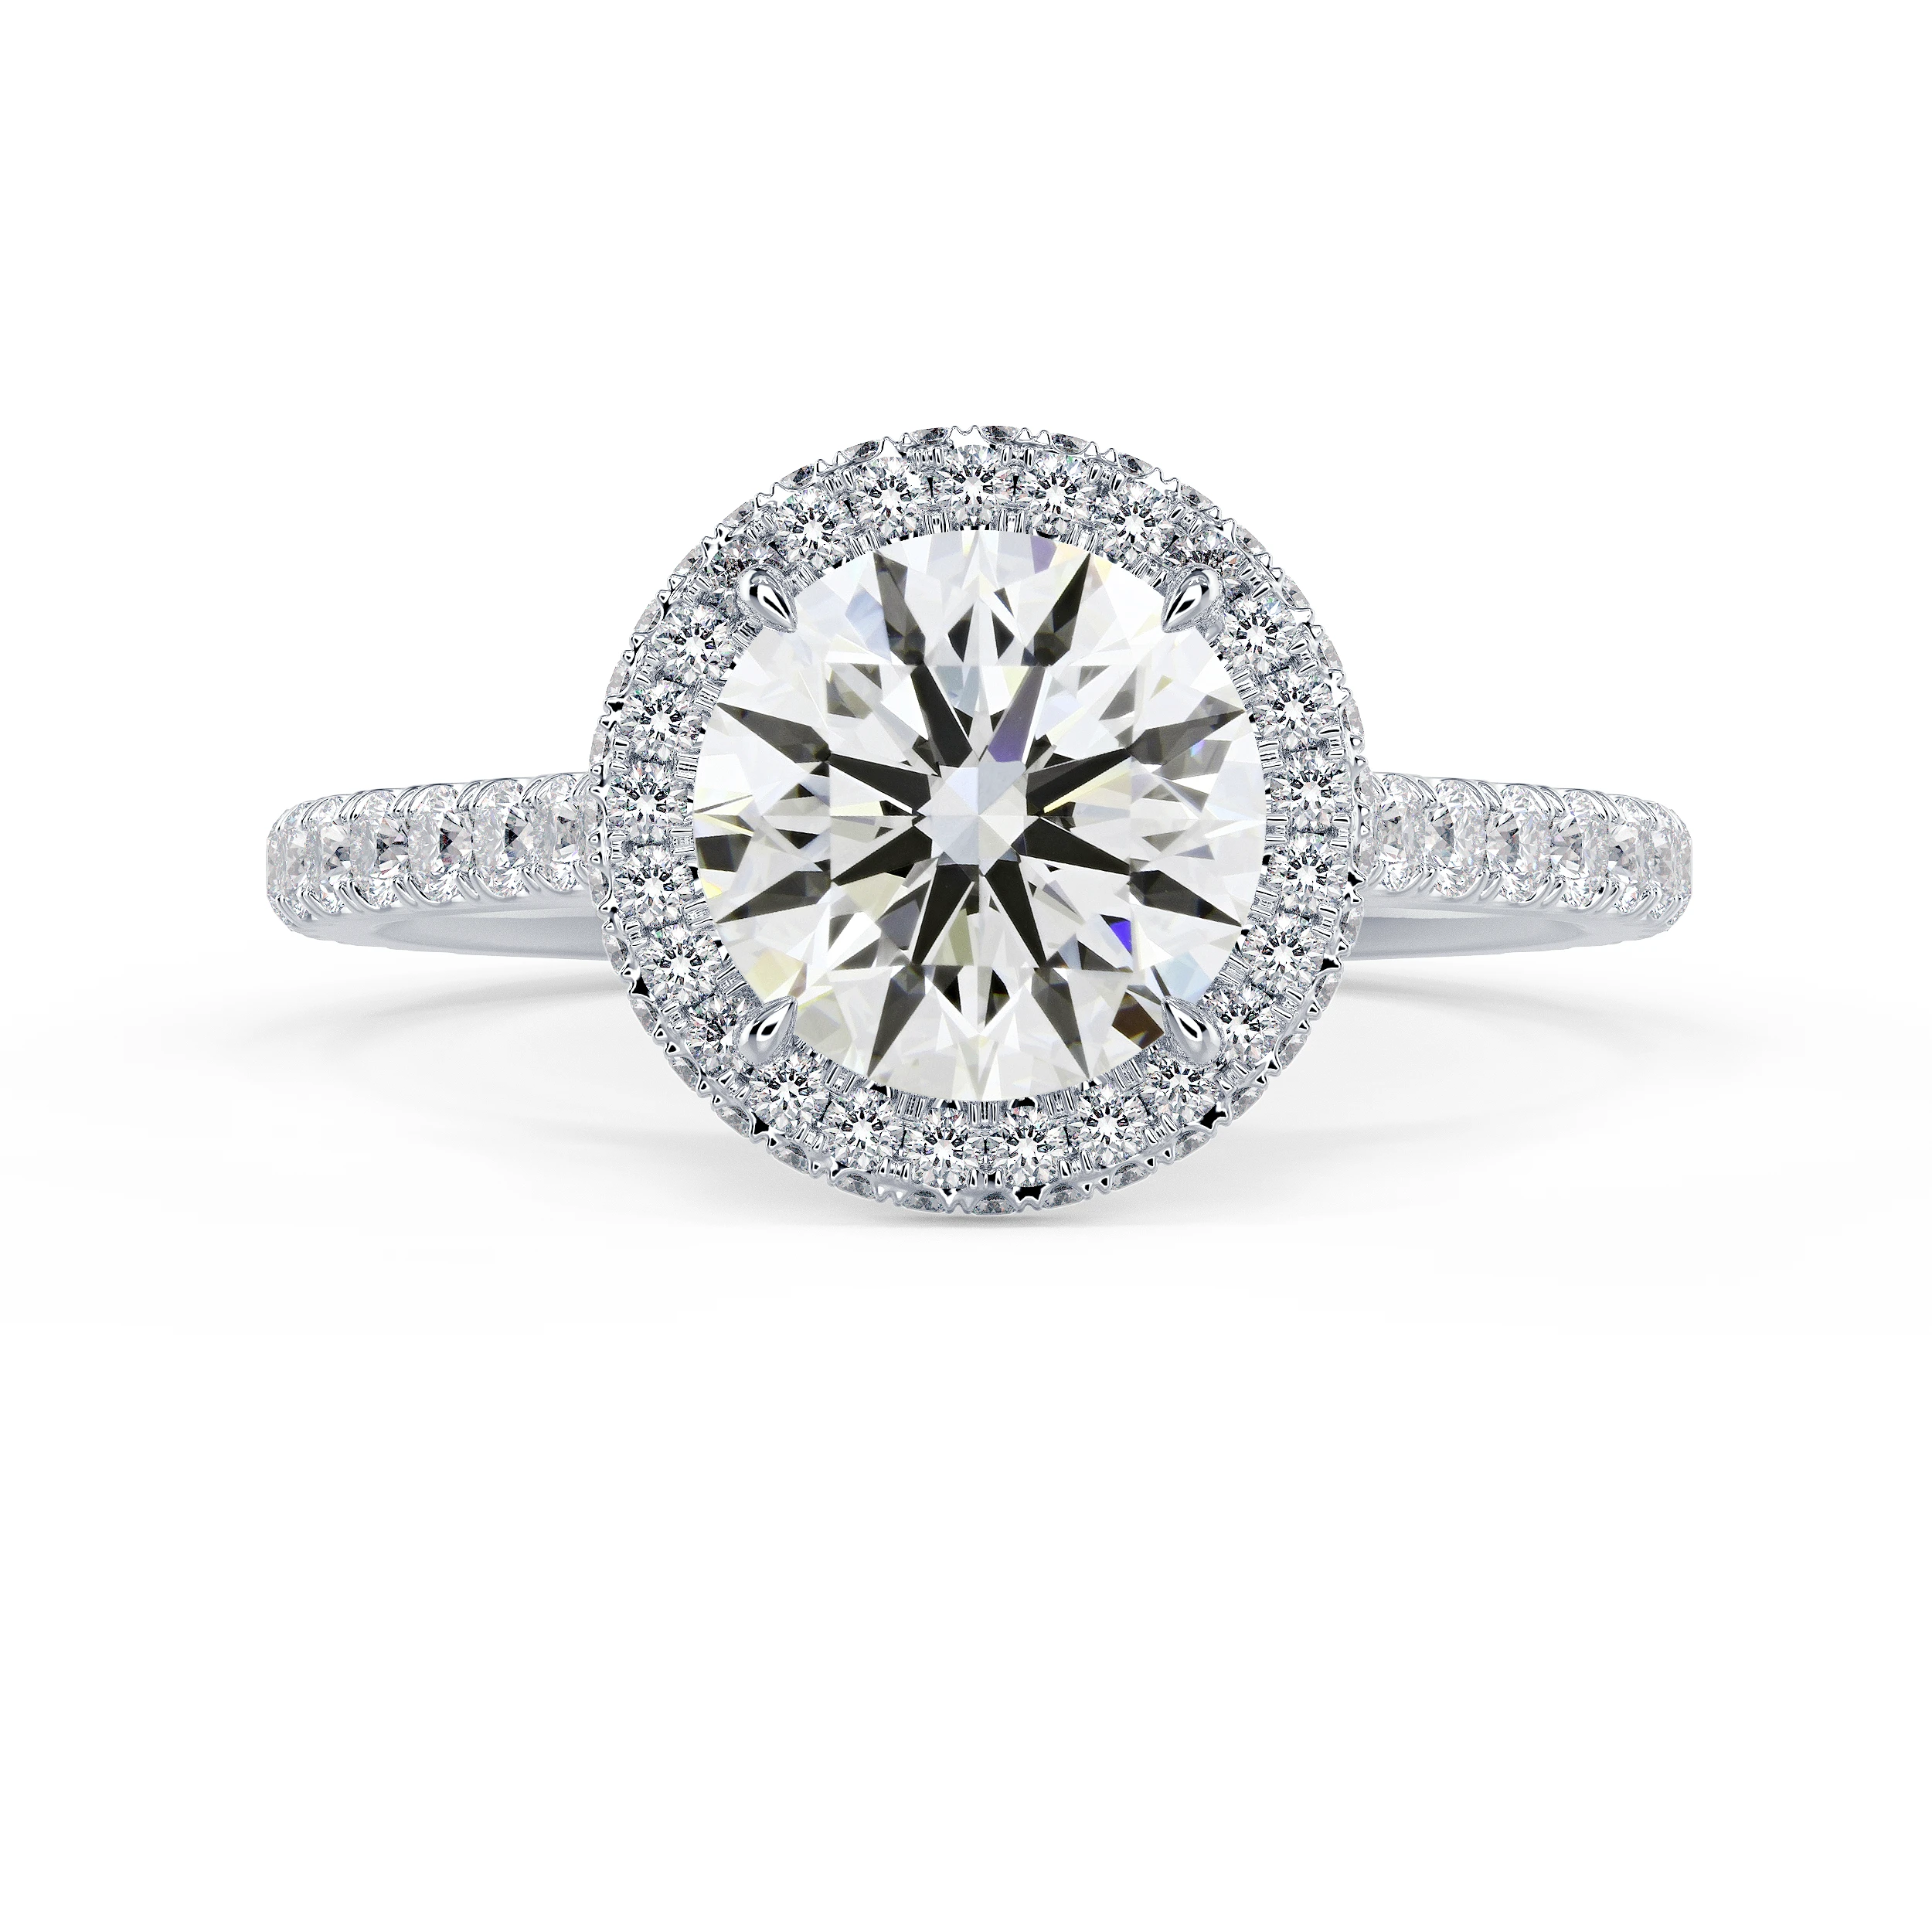 White Gold Double Sided Halo Diamond Engagement Ring featuring Exceptional Quality Diamonds (Main View)